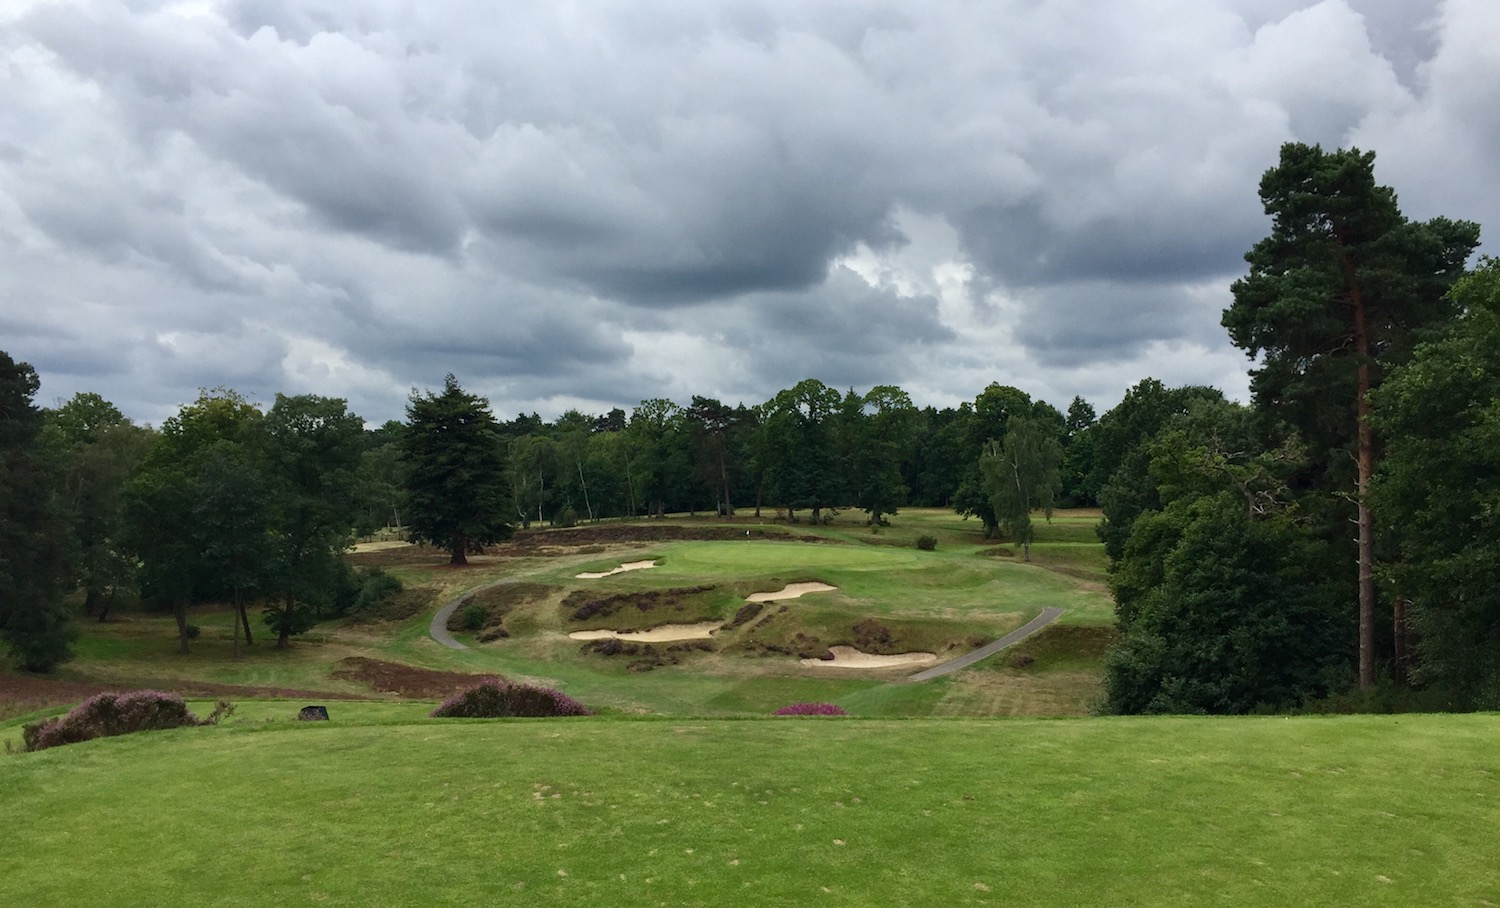 St. George's Hill Golf Club is an absolute must-play Harry Colt design.